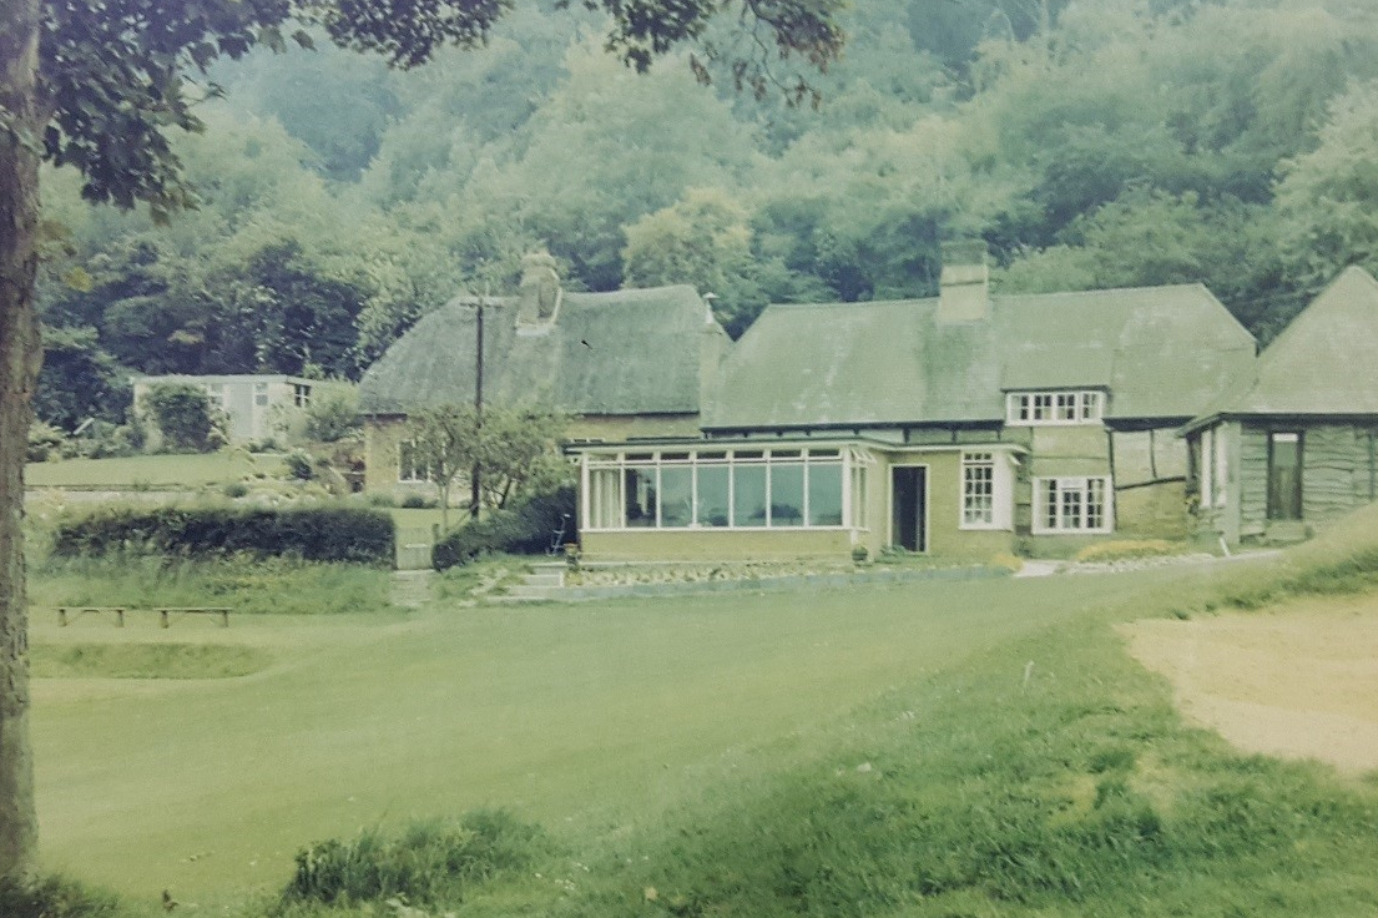 Our Club House c1990